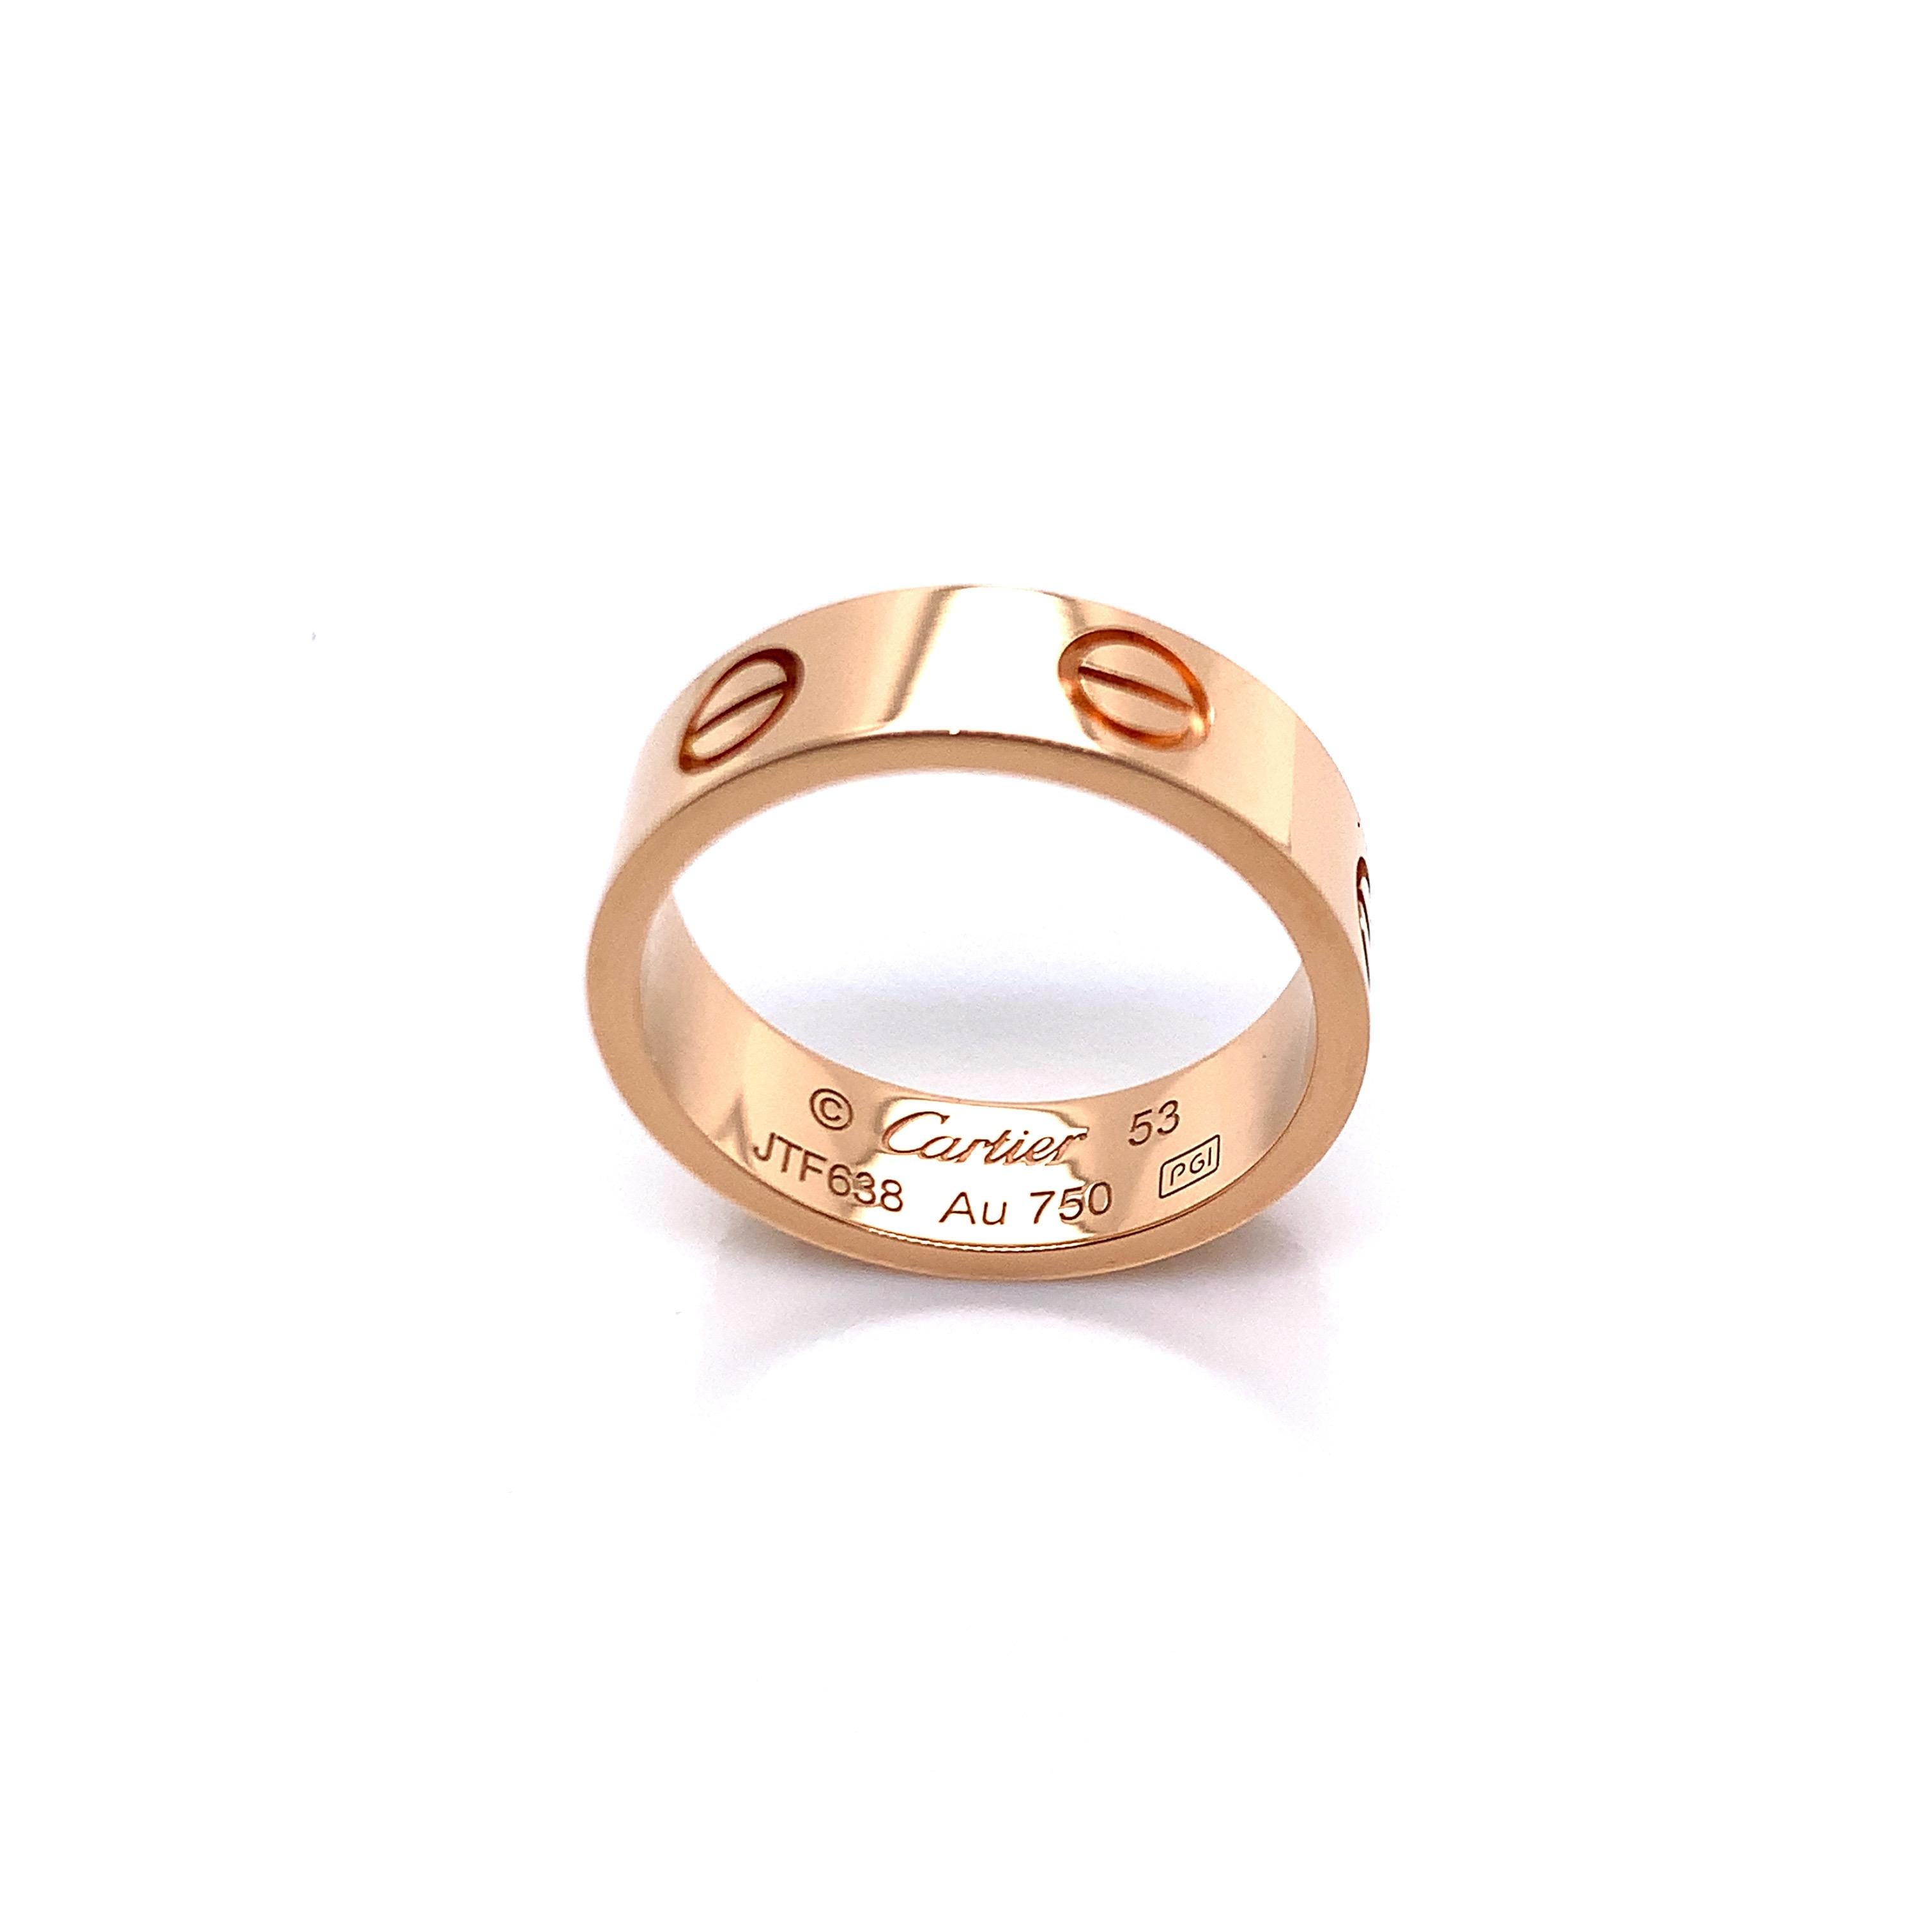 An 18k rose gold Cartier Love ring (750/1000), weighing 6.0 grams in size 53 (approximately 6.5 in US). 

Serial No. JTF638